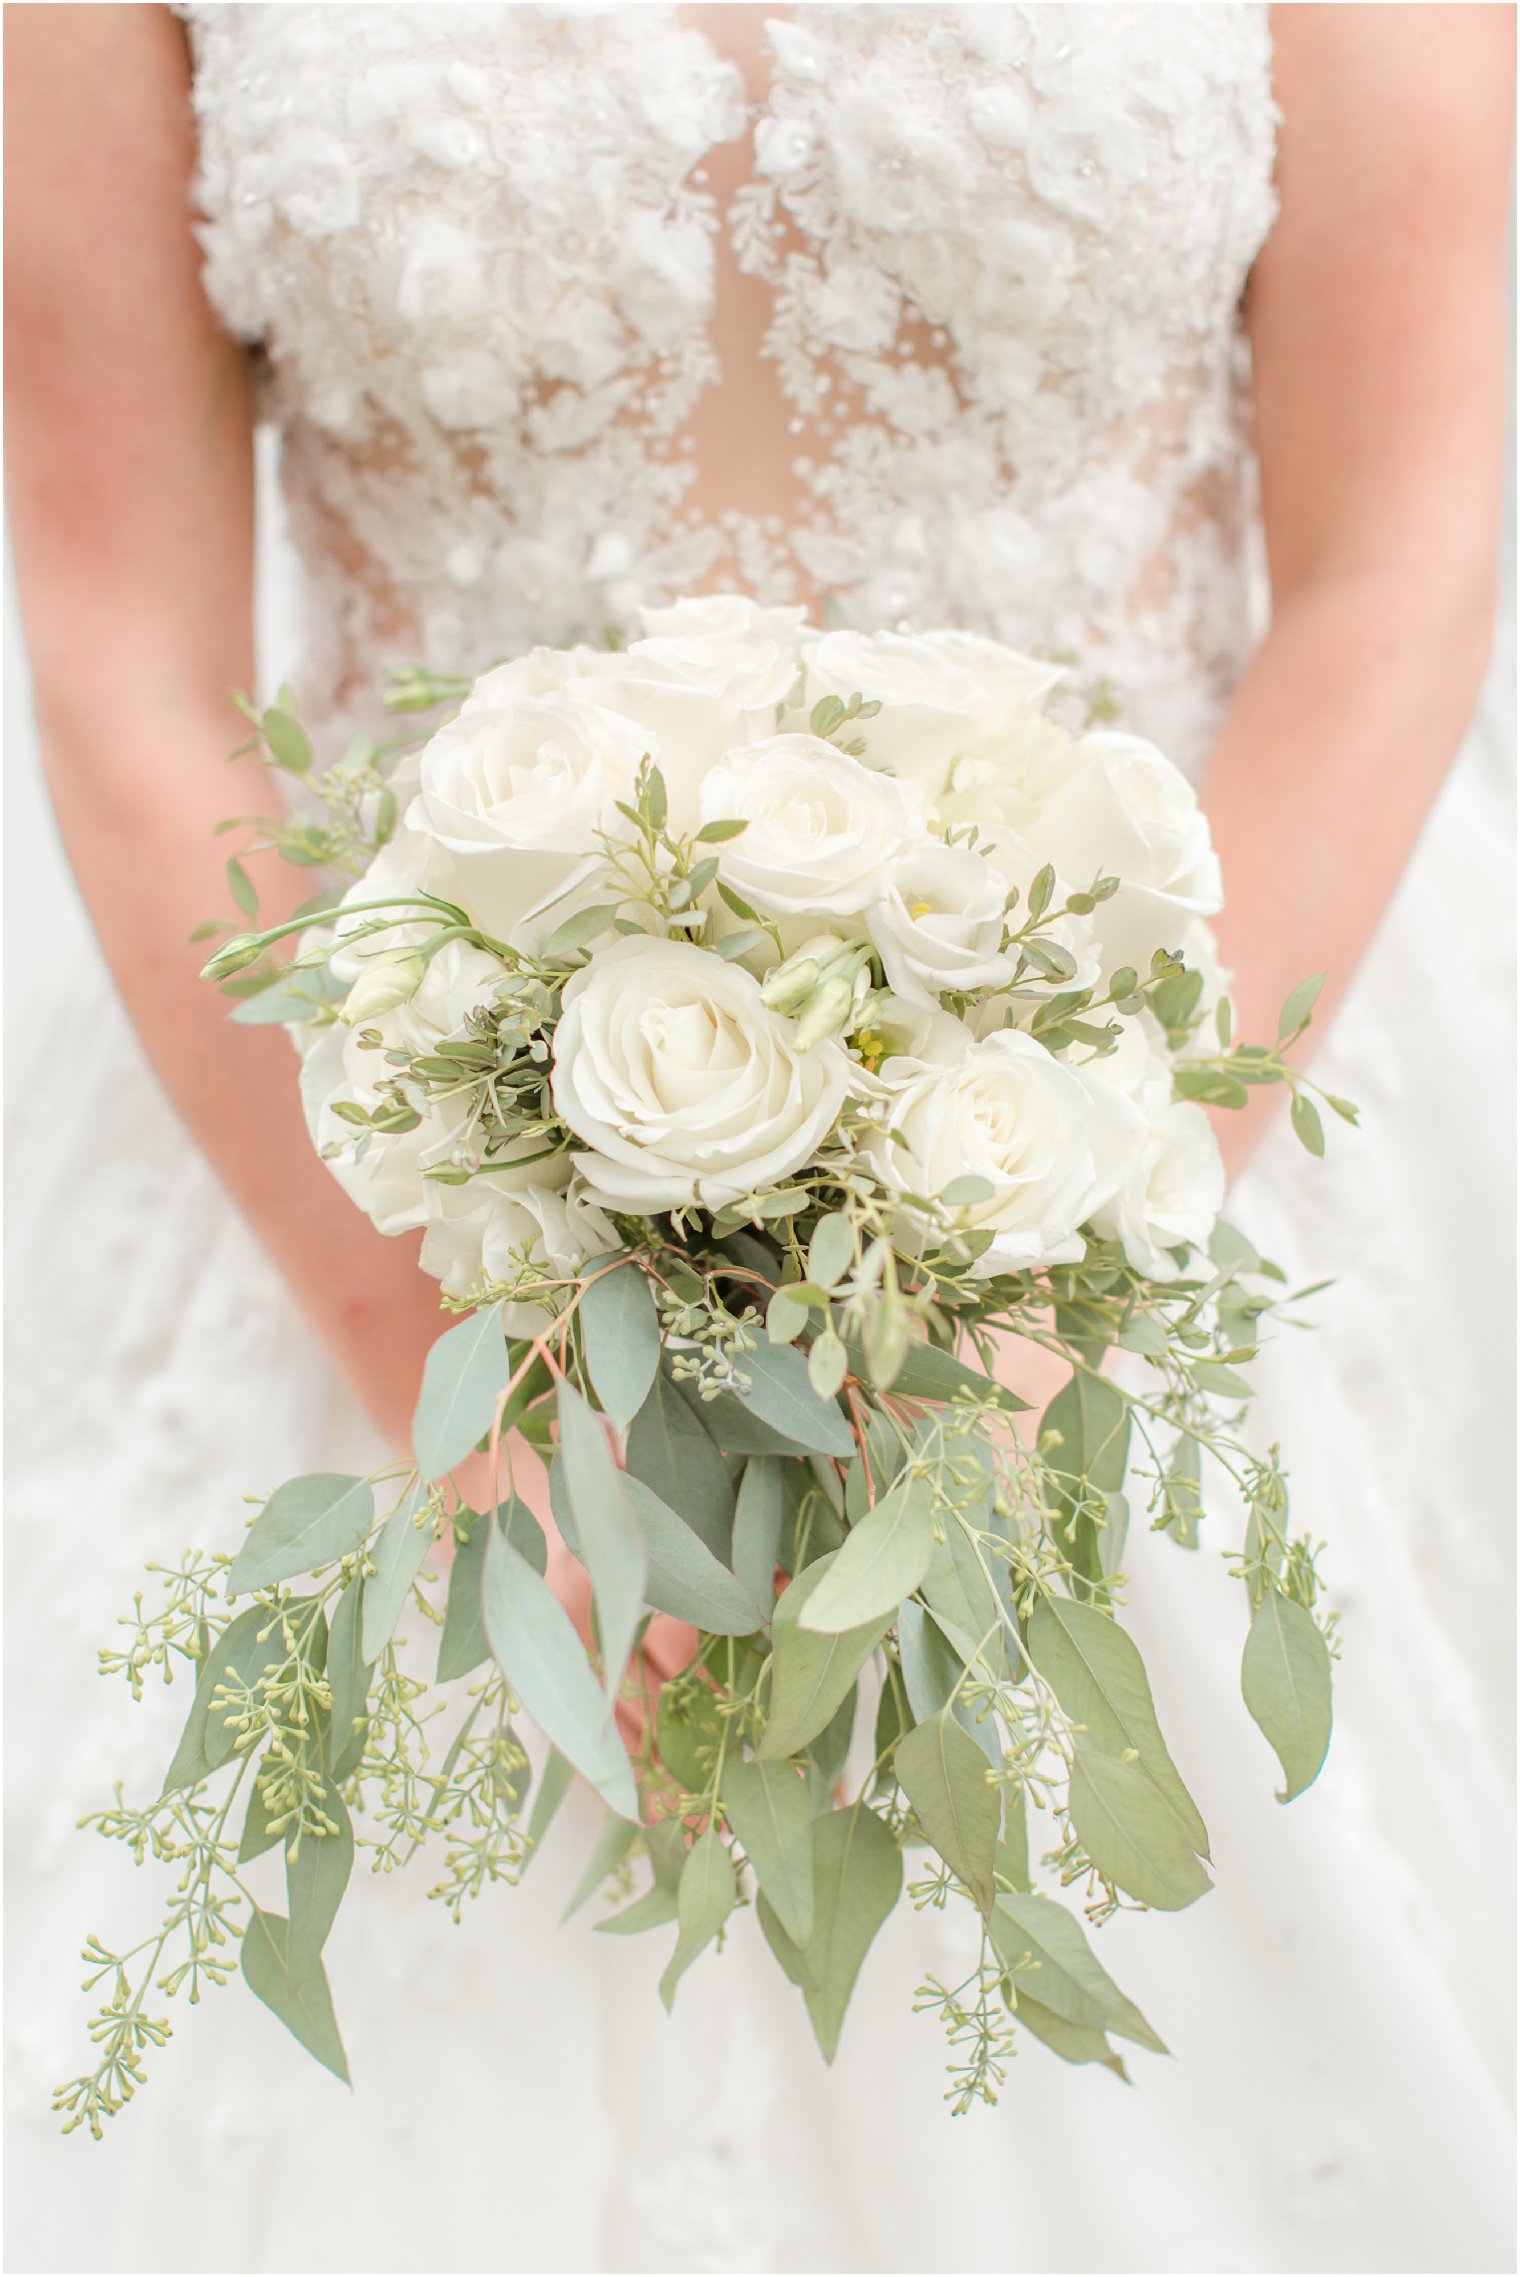 classic ivory rose bouquet by Park Floral for Legacy Castle wedding day photographed by Idalia Photography